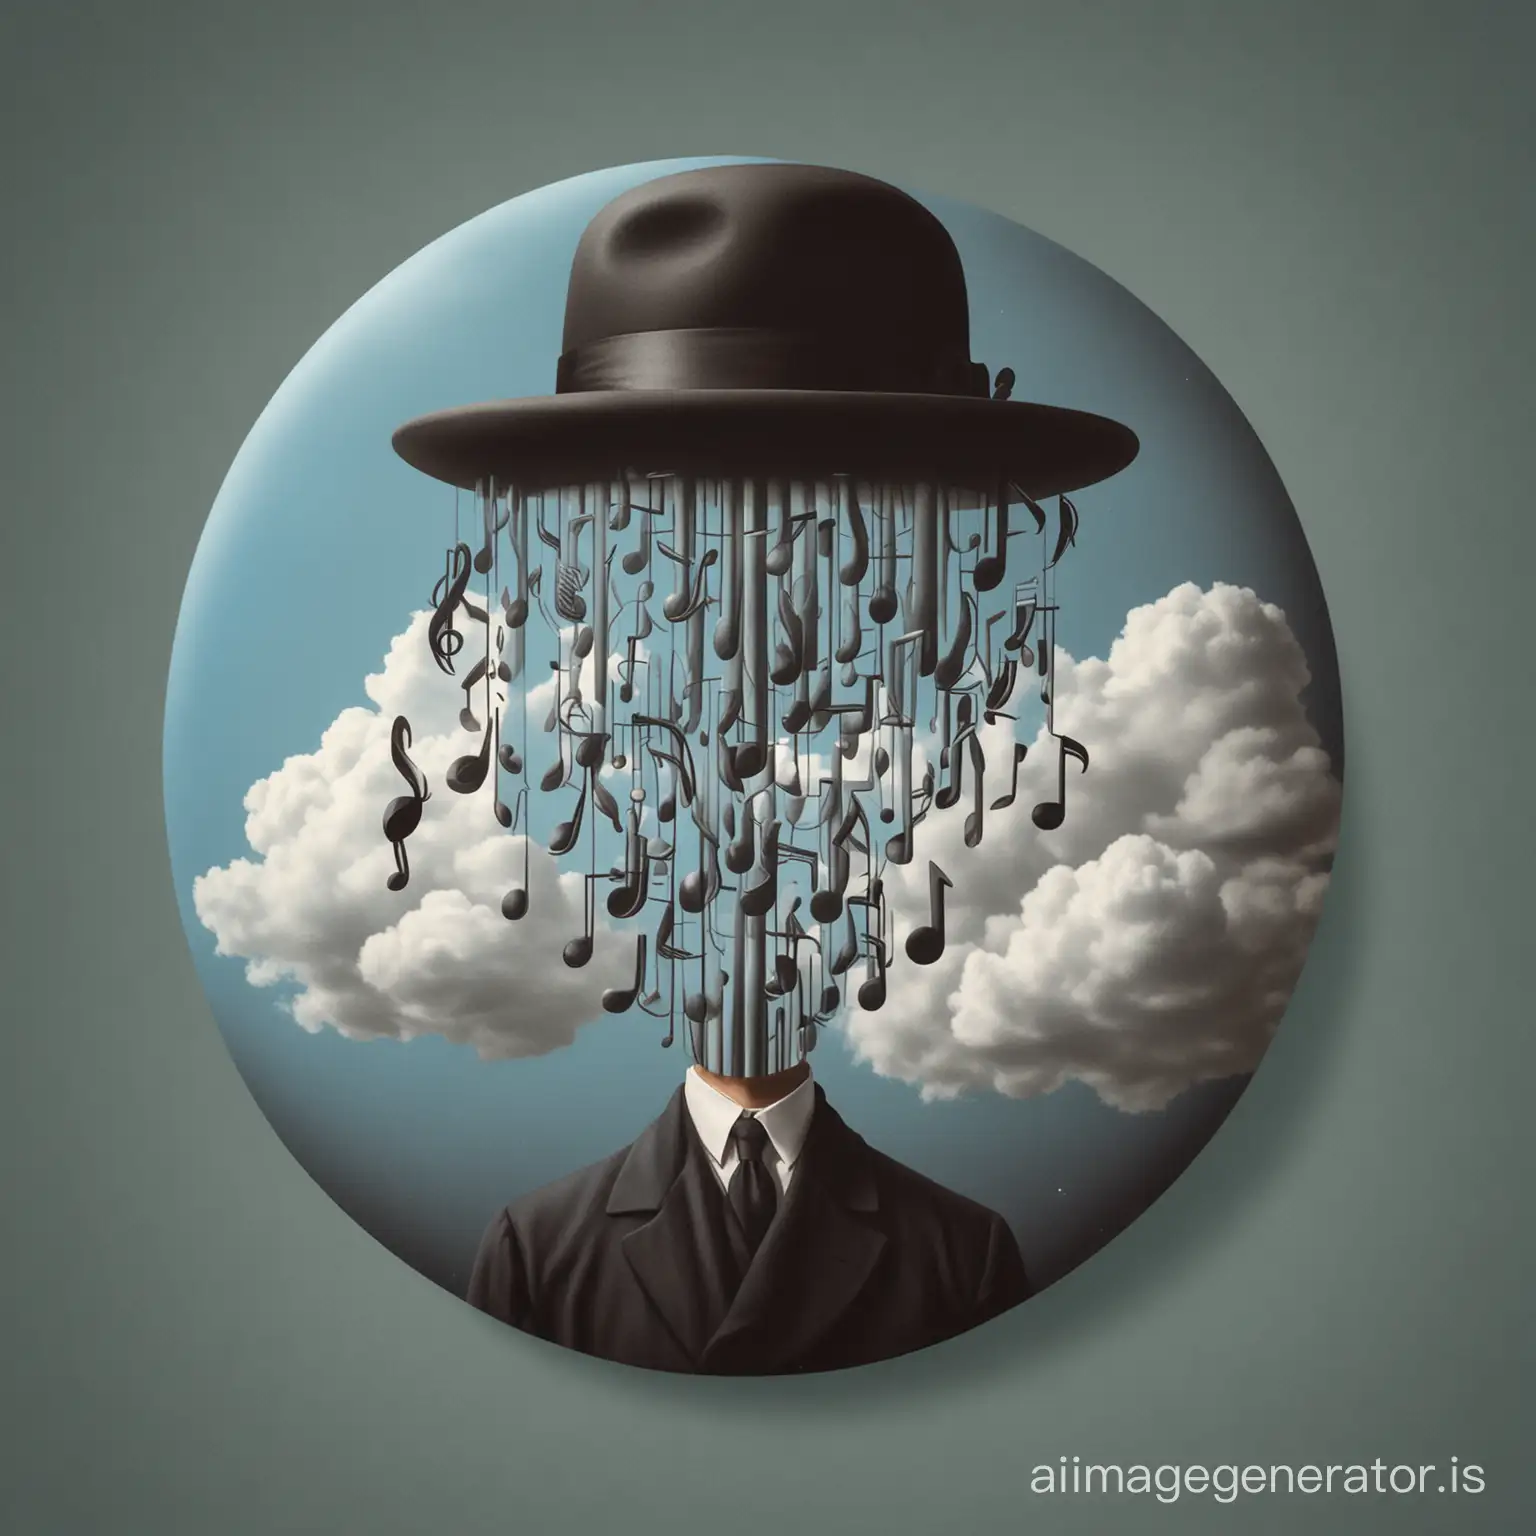 A logo for a network of music teachers with a Magritte-style